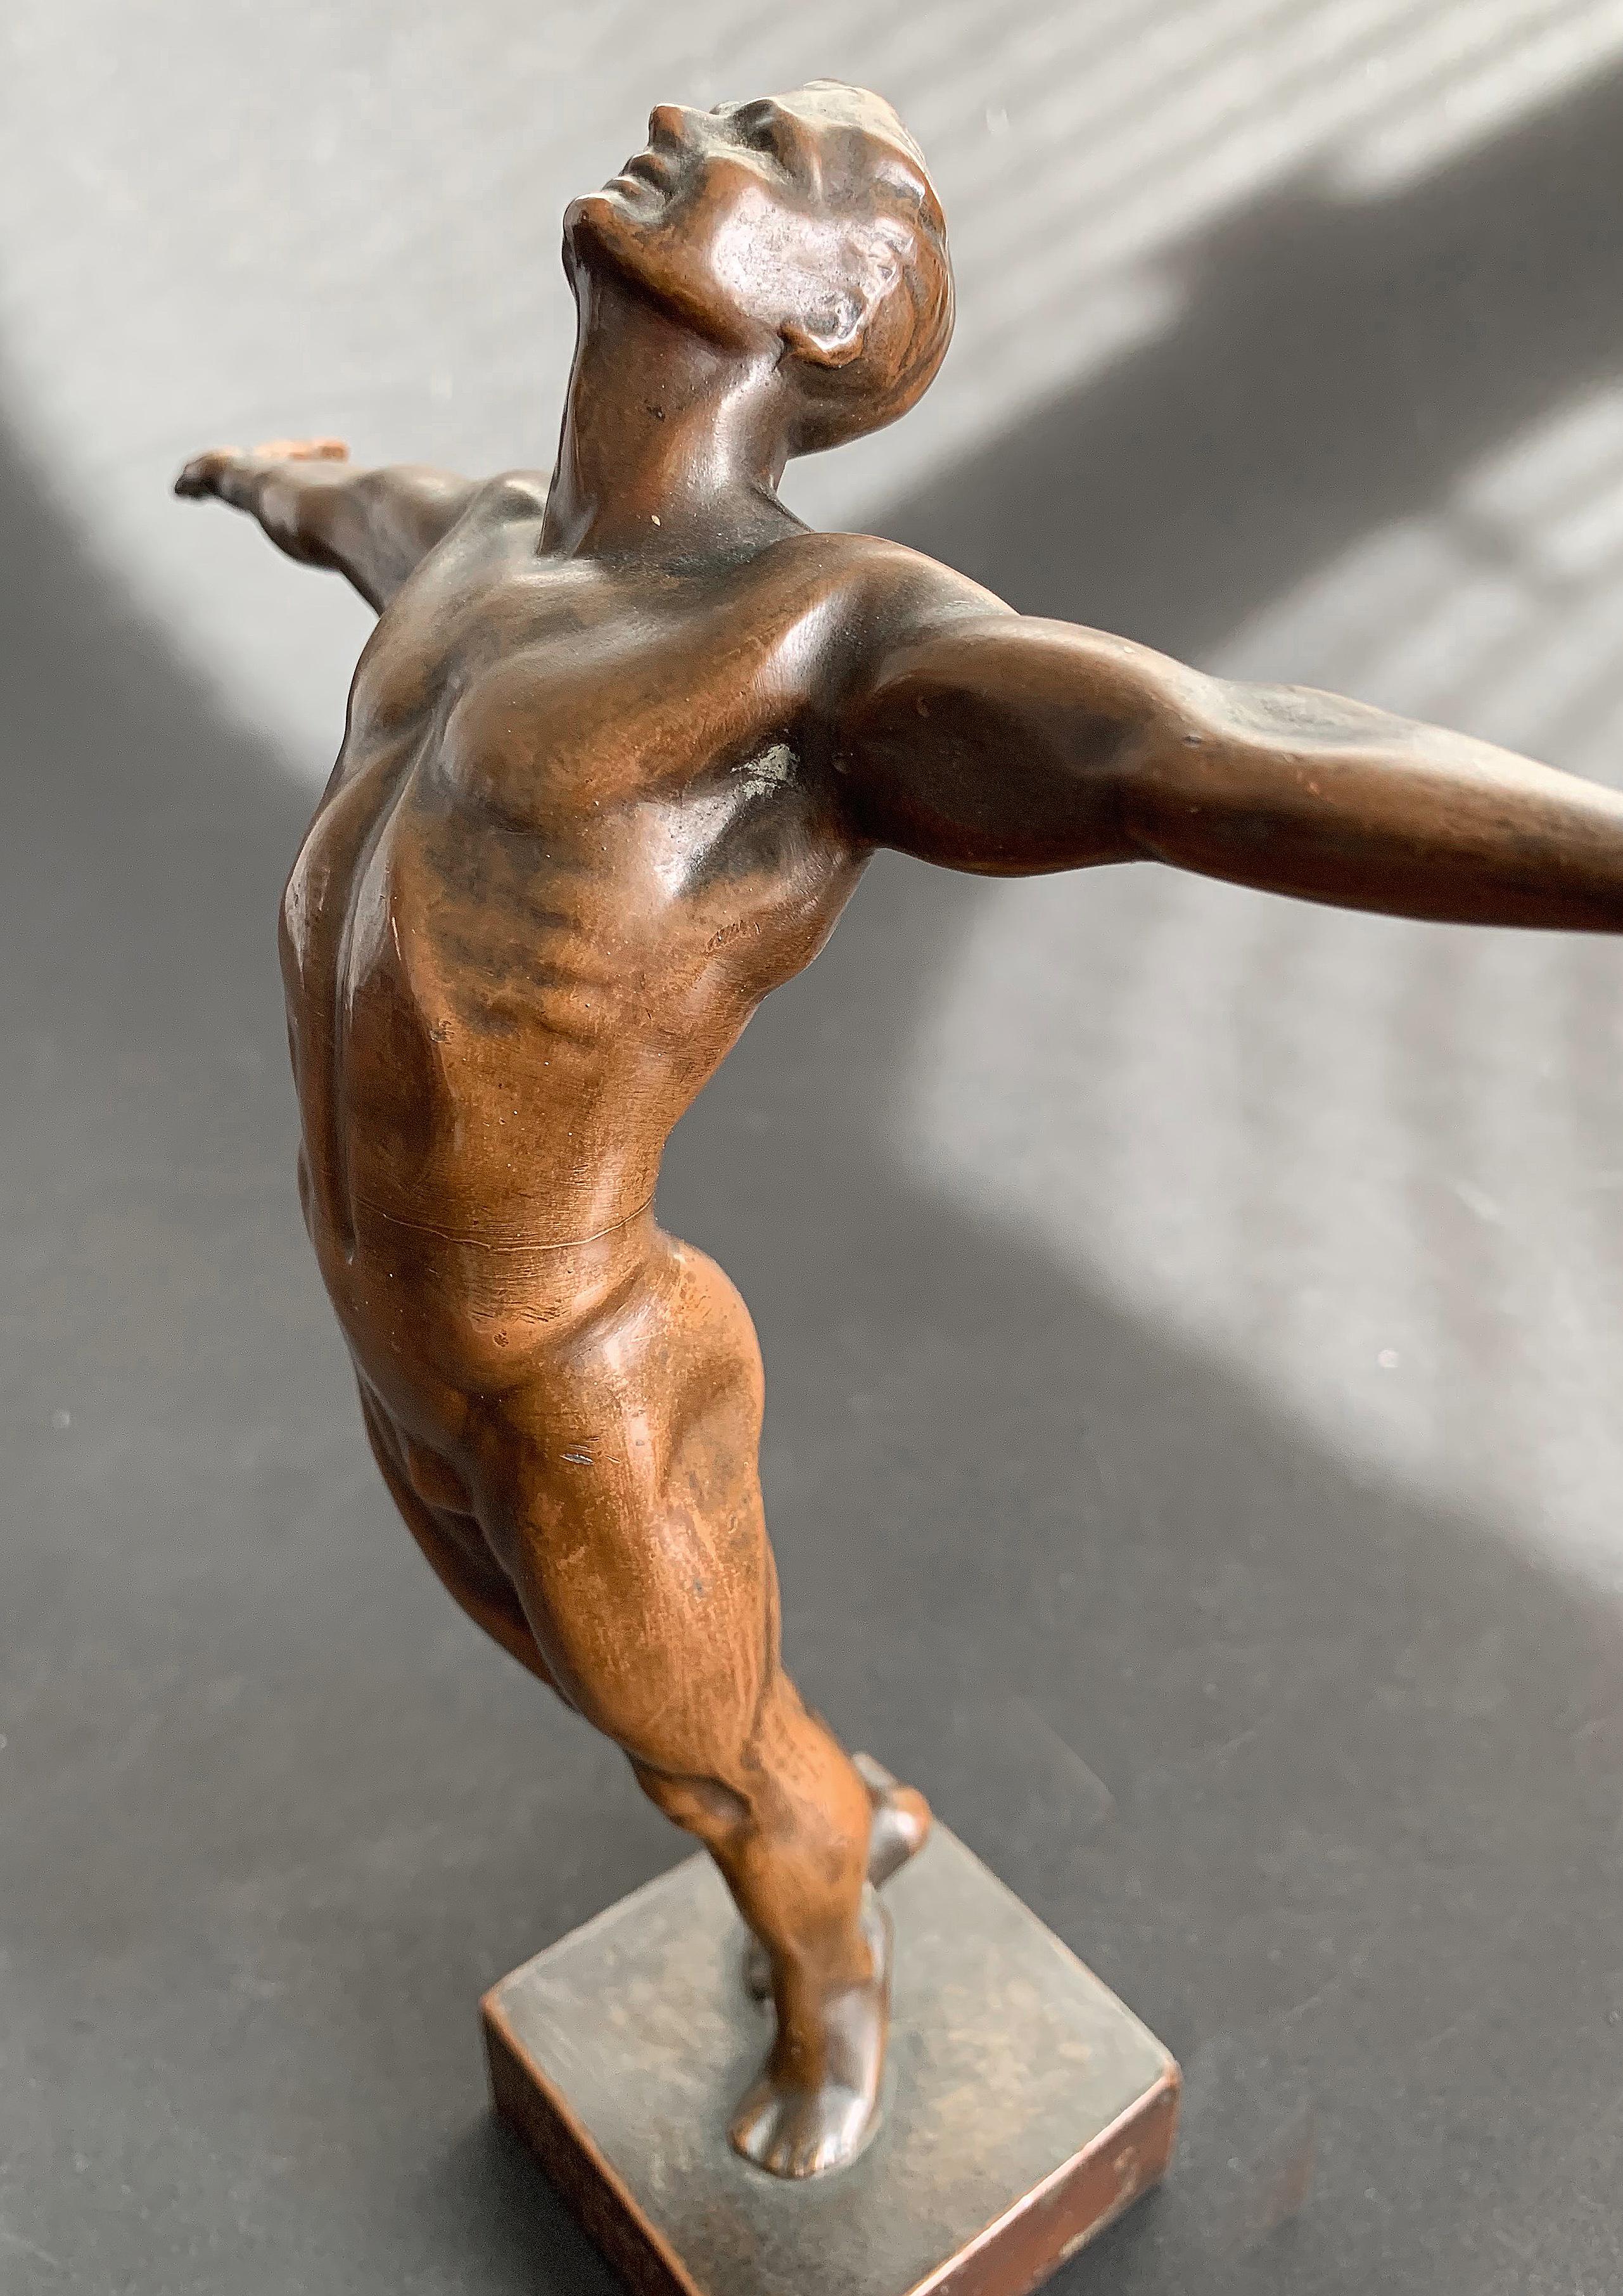 ‘Dedication to Service, ’ Rare Art Deco Sculpture with Male Nude by Burnham 1